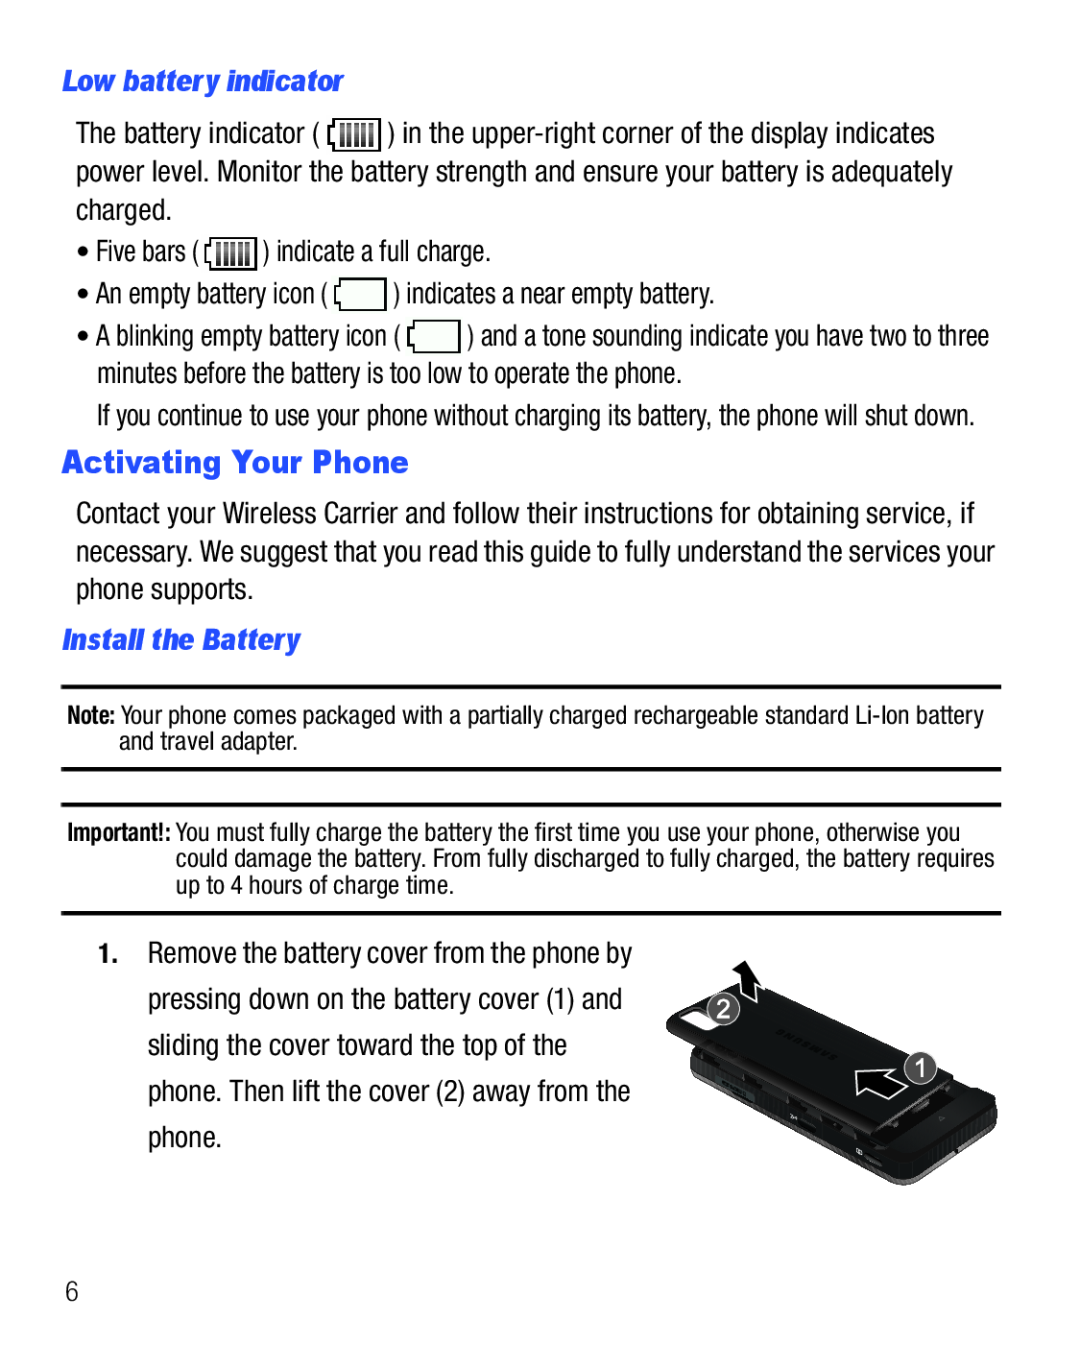 Samsung GH68-25119A user manual Activating Your Phone, Low battery indicator, Install the Battery 